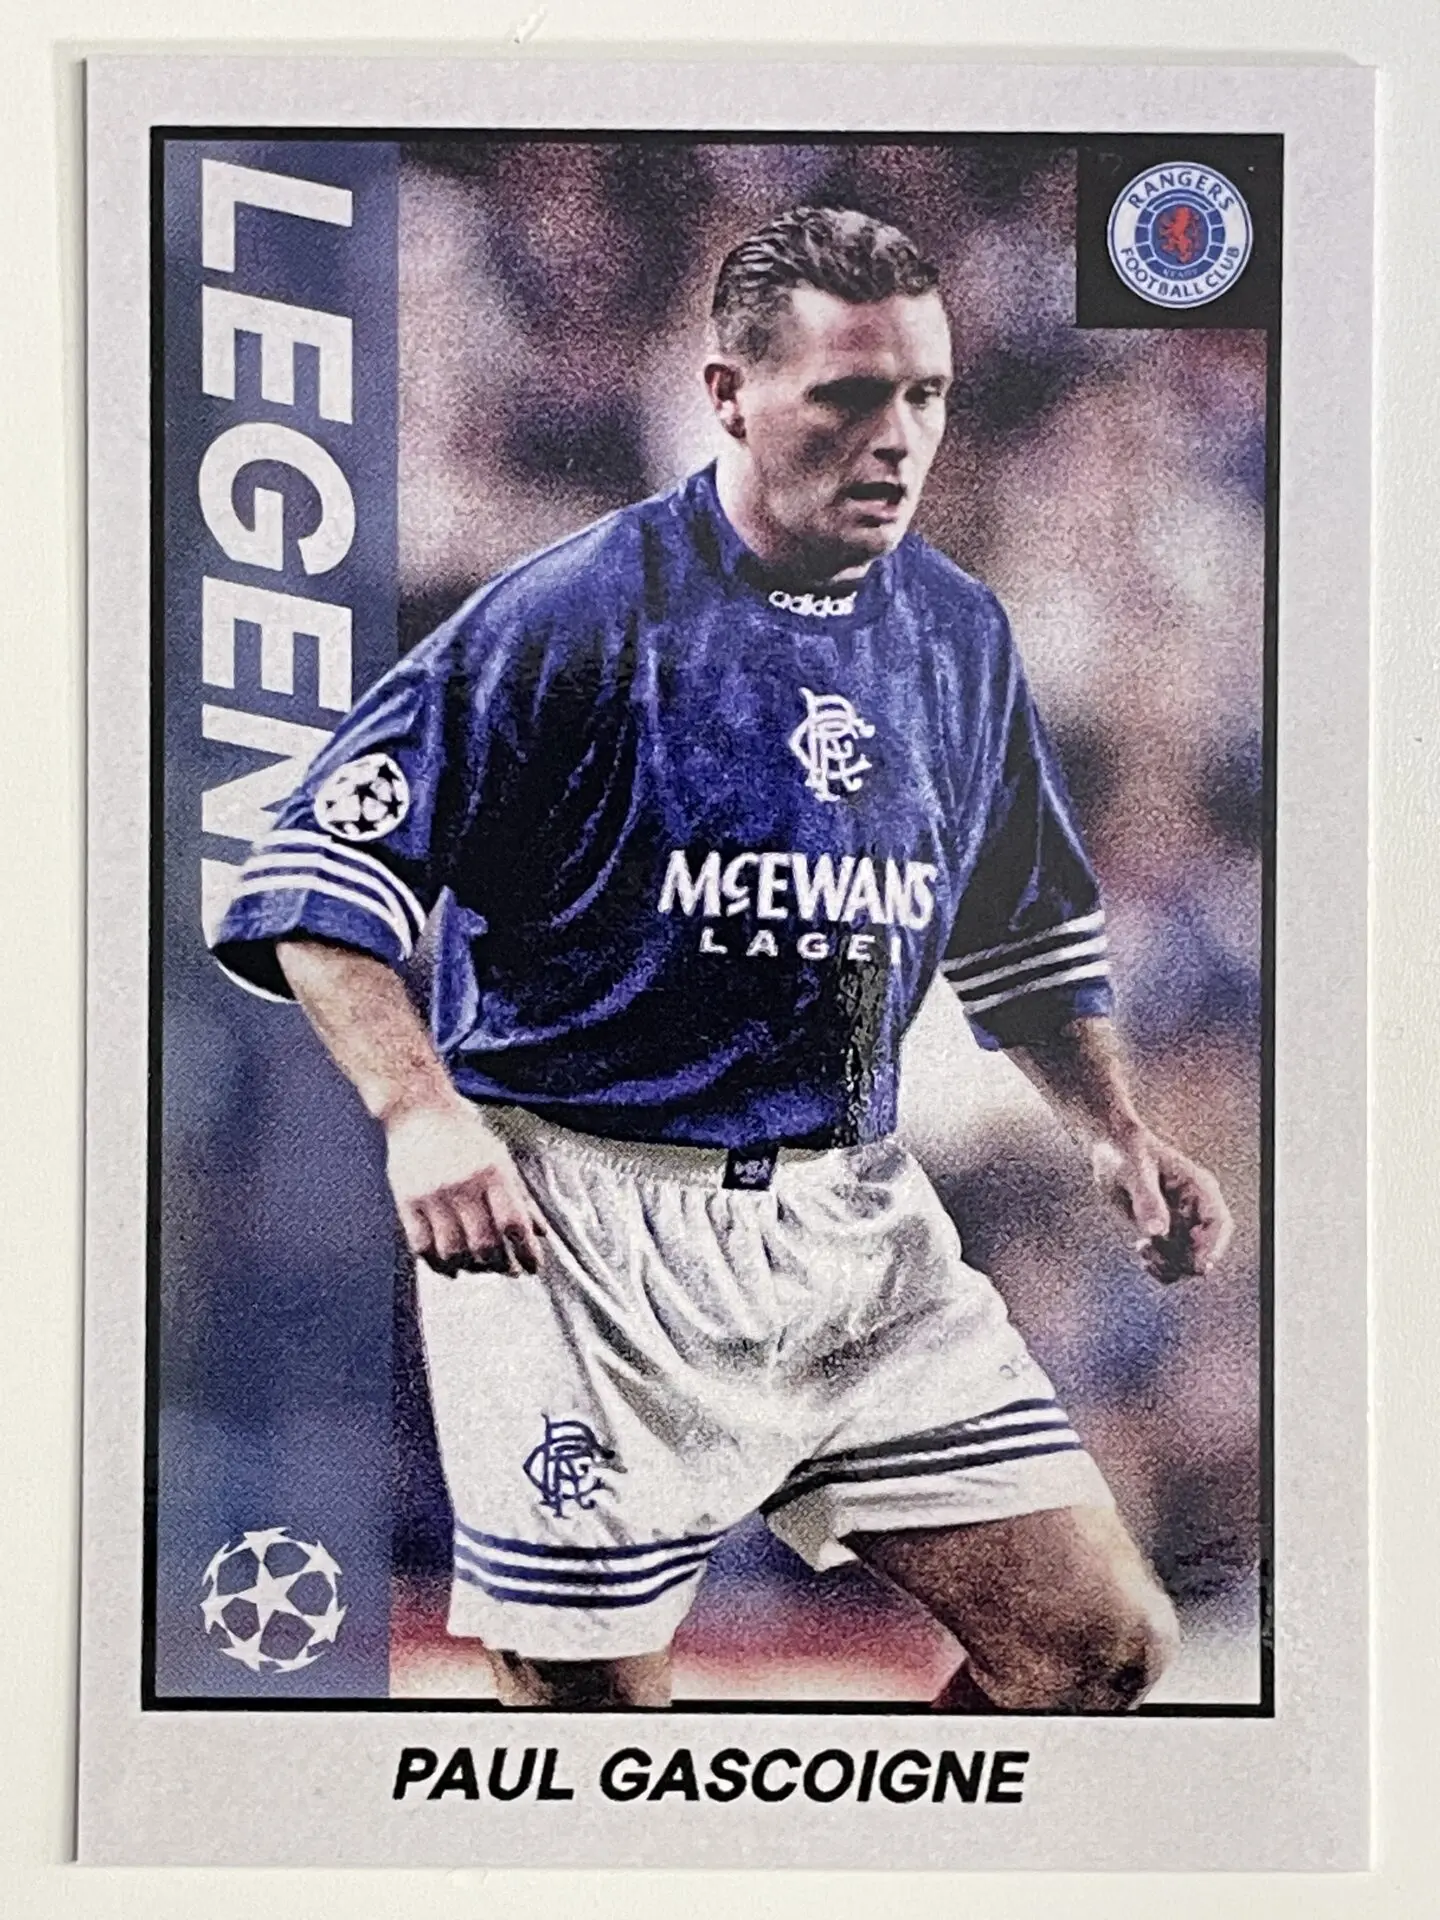 150 Paul Gascoigne Rangers Legend Topps Merlin Heritage 97 UEFA Champions  League Hobby Card - Solve Collectibles